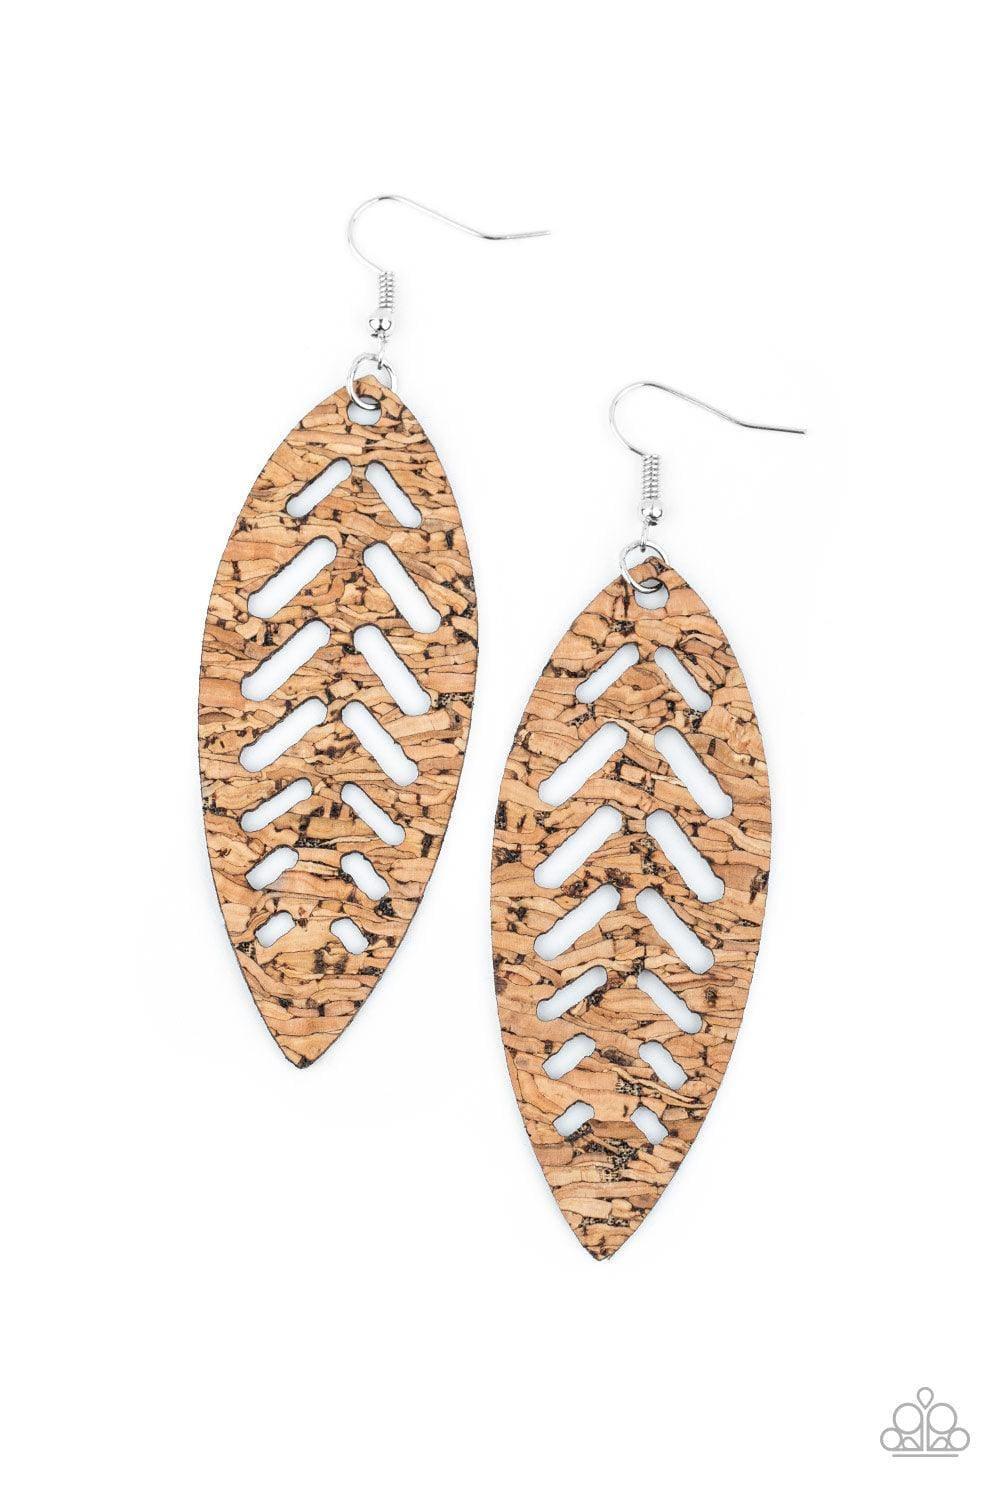 Paparazzi Accessories - Youre Such a Cork Earrings - Bling by JessieK